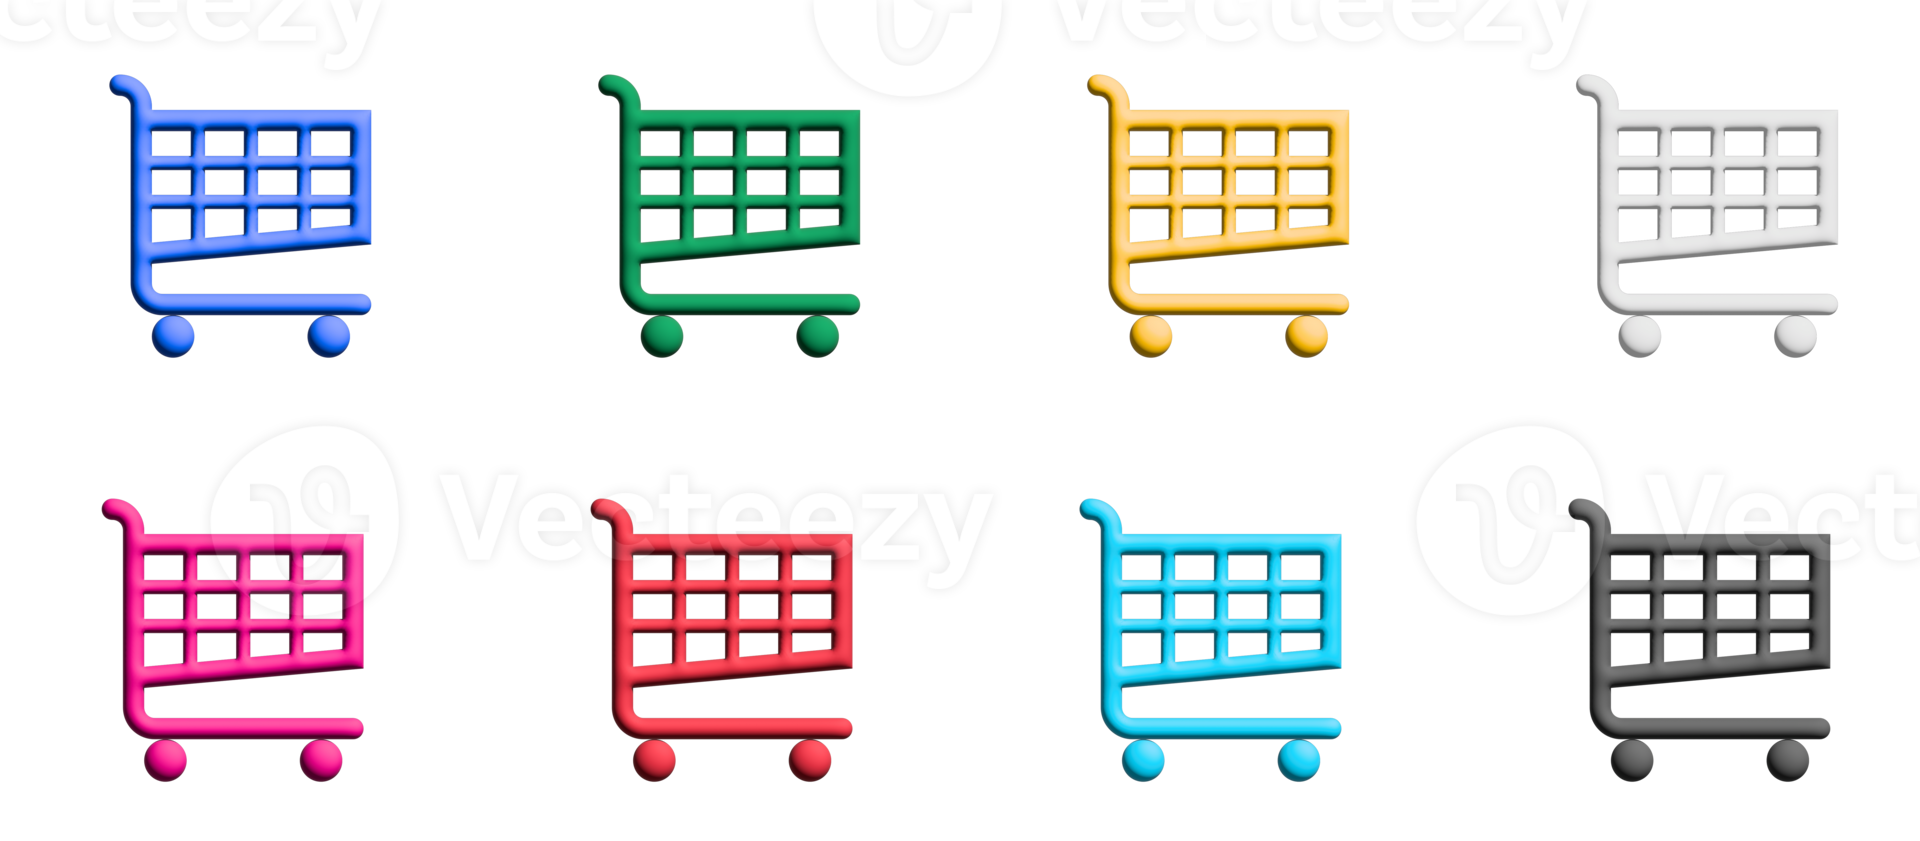 Shopping cart icon set, colorful symbols graphic elements png